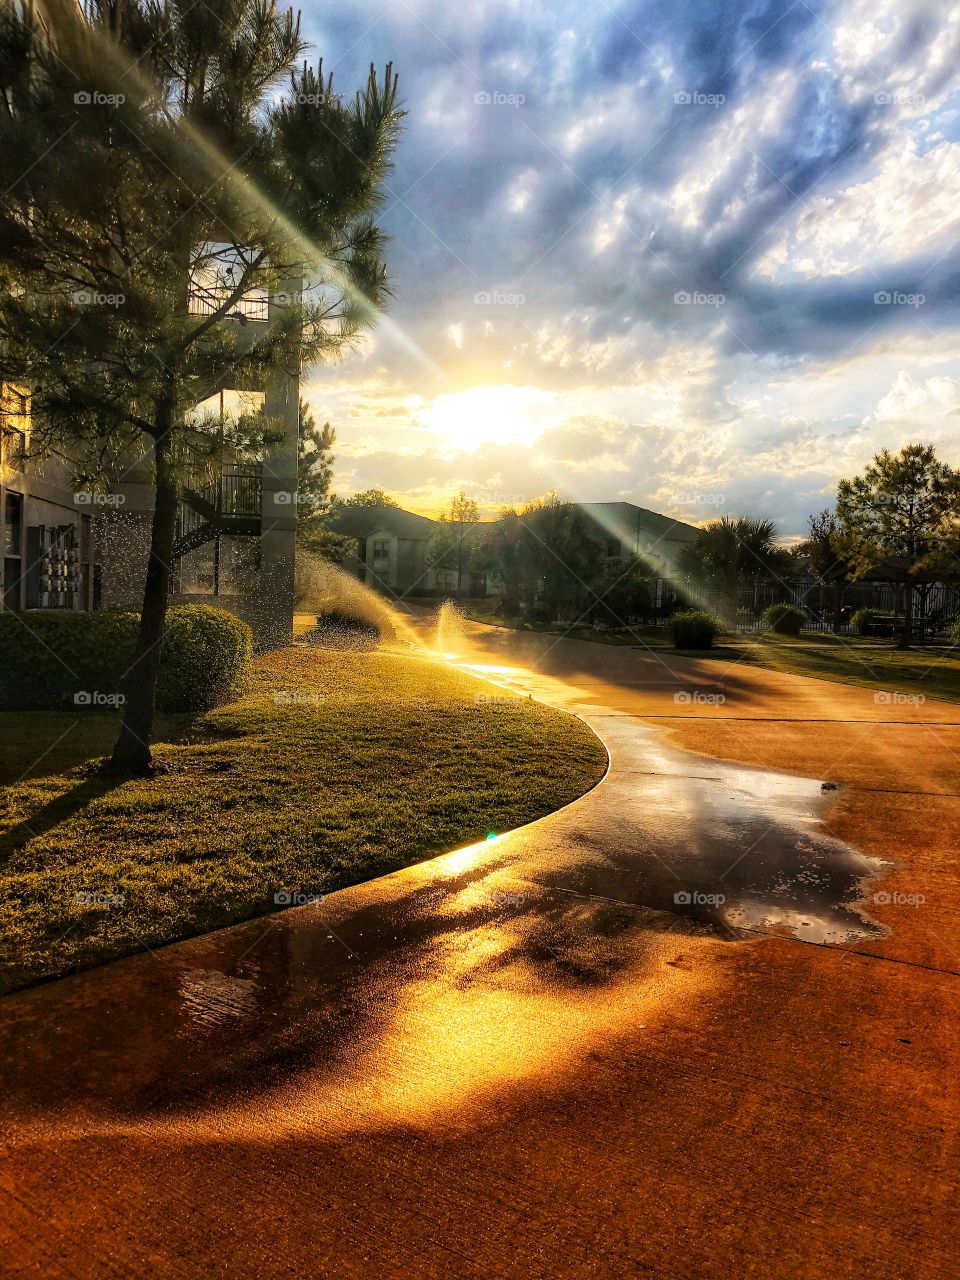 Good morning! I love the evening  walks before relaxing for the night. You see so much beauty around you. Sunsets, evening rays, and a little mist from the sprinkler system.